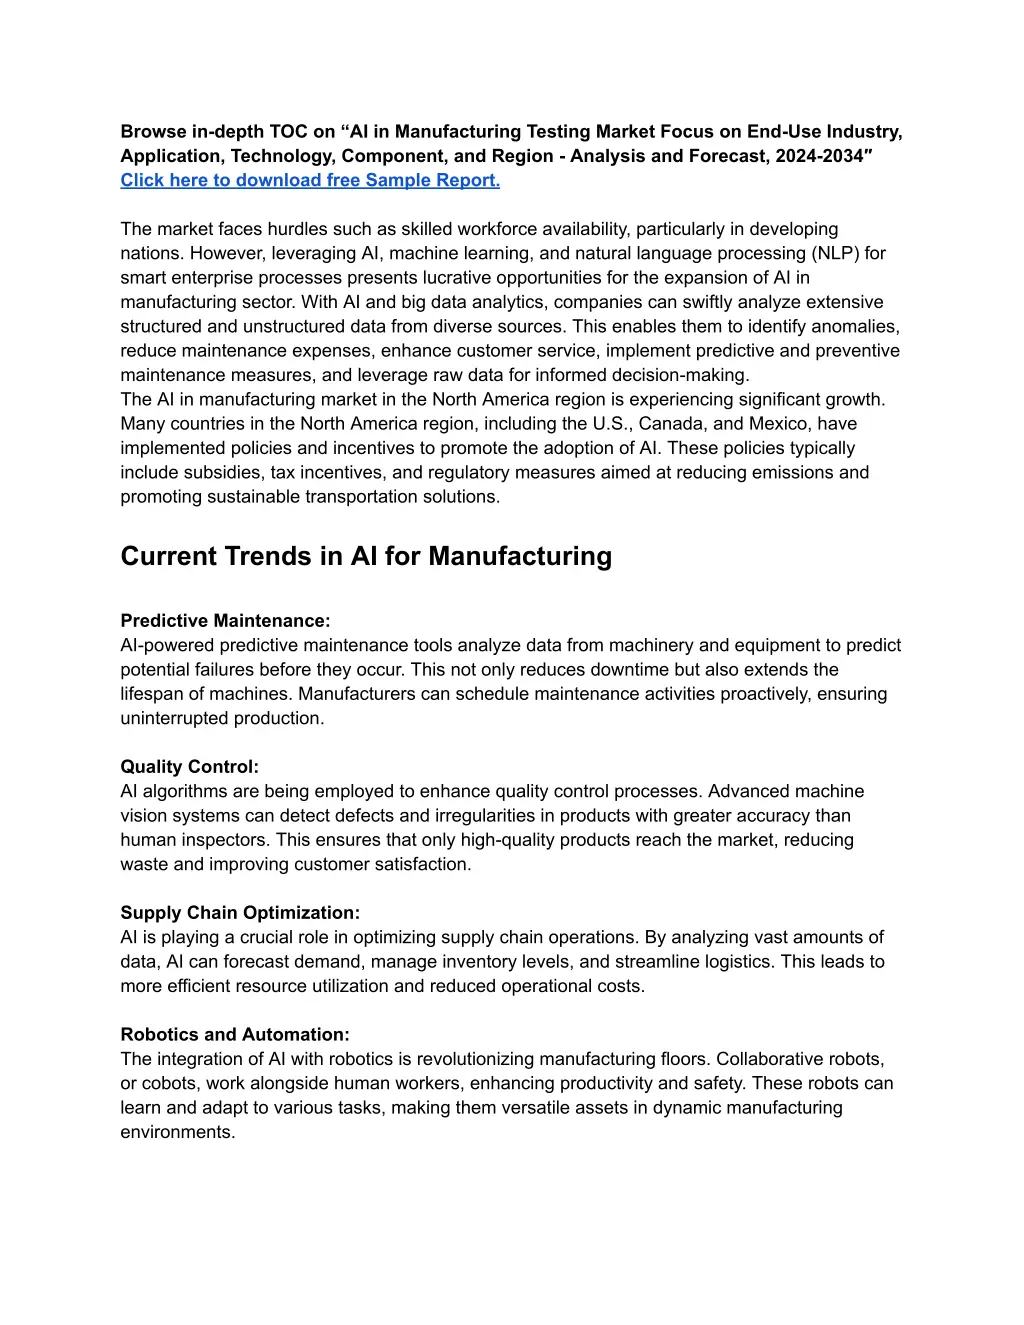 browse in depth toc on ai in manufacturing